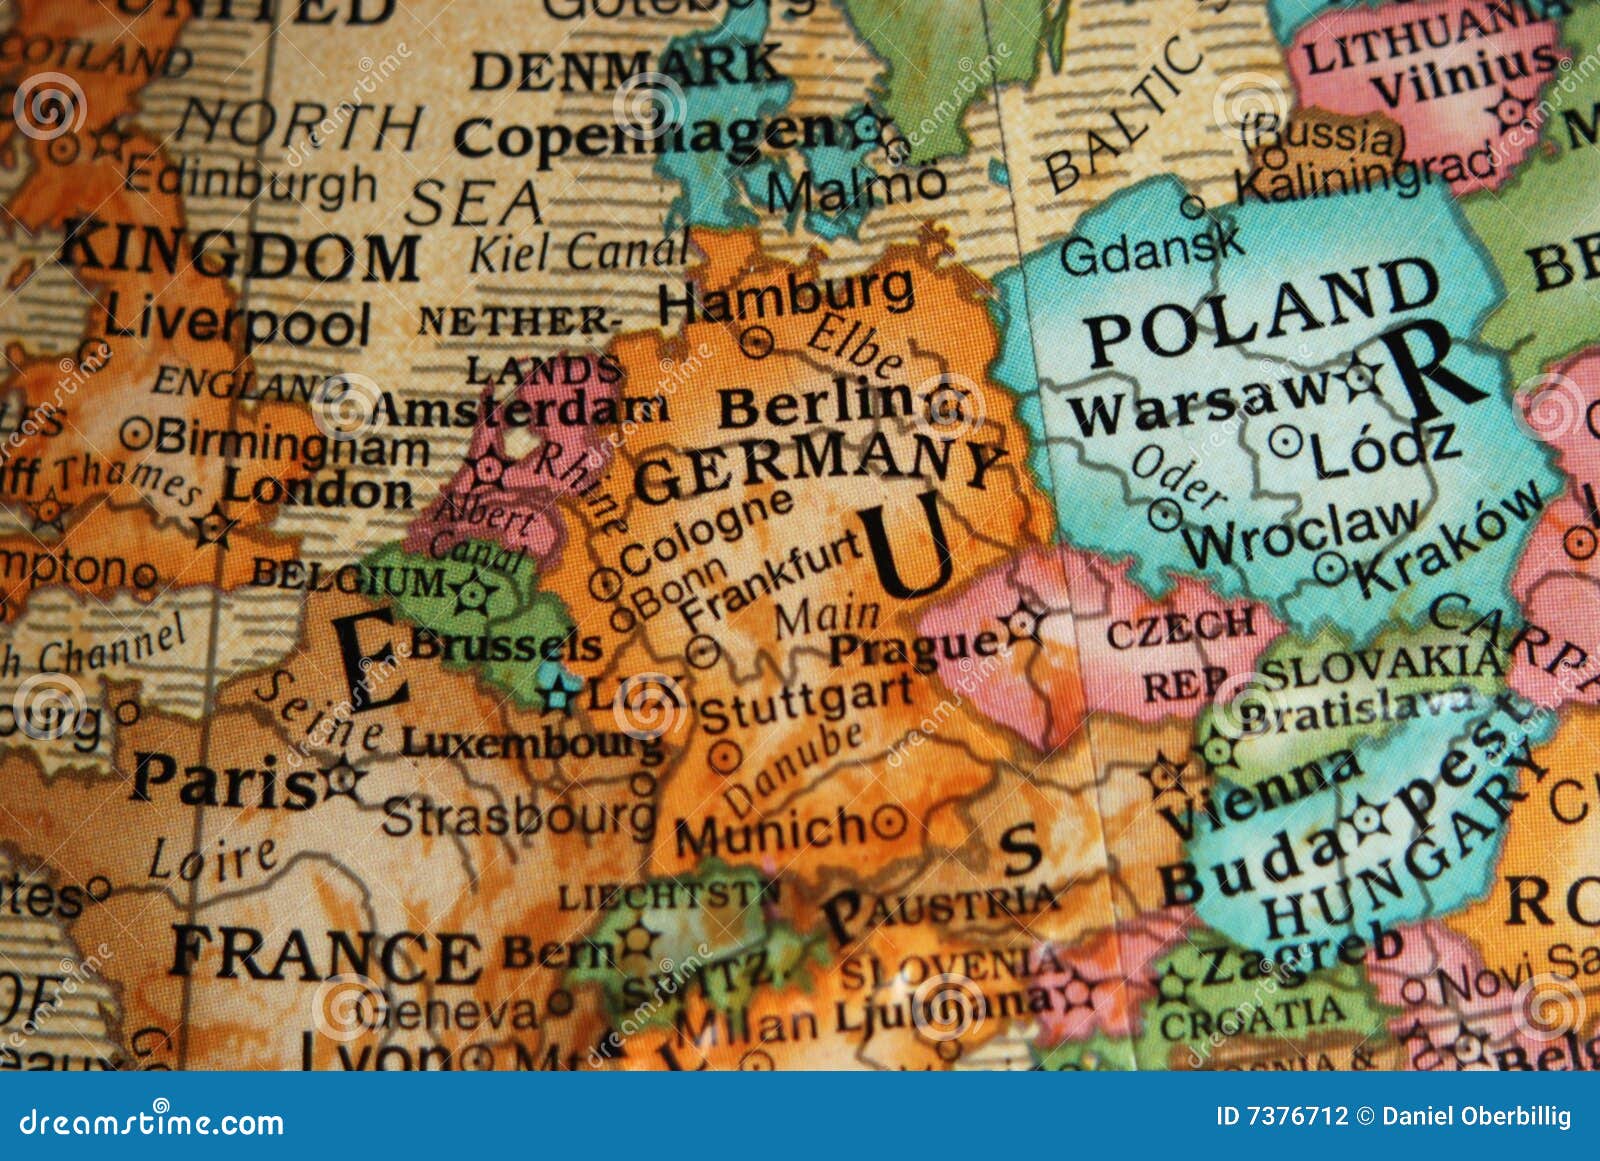 Globe  Map Of Central Europe Stock Photography  Image: 7376712